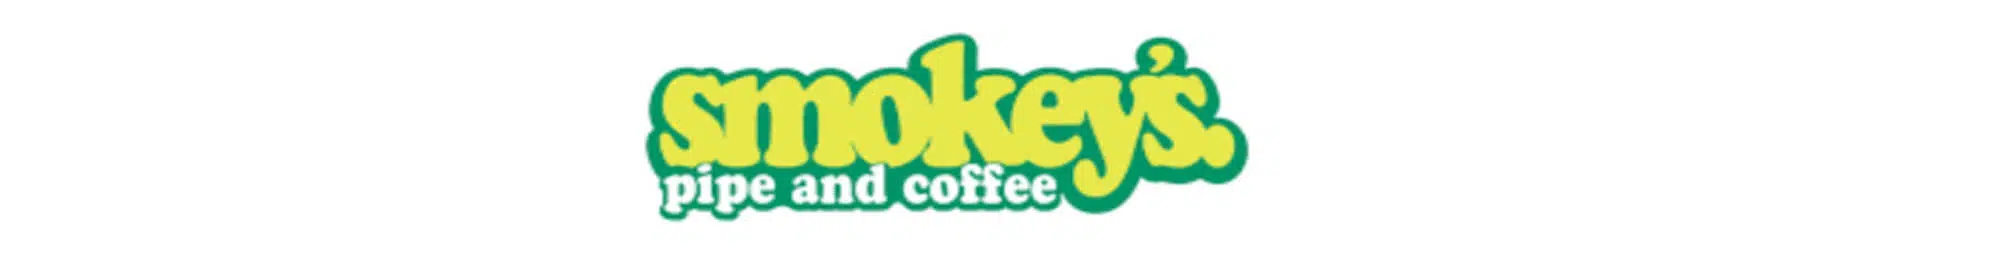 image of smokey’s pipe and coffee